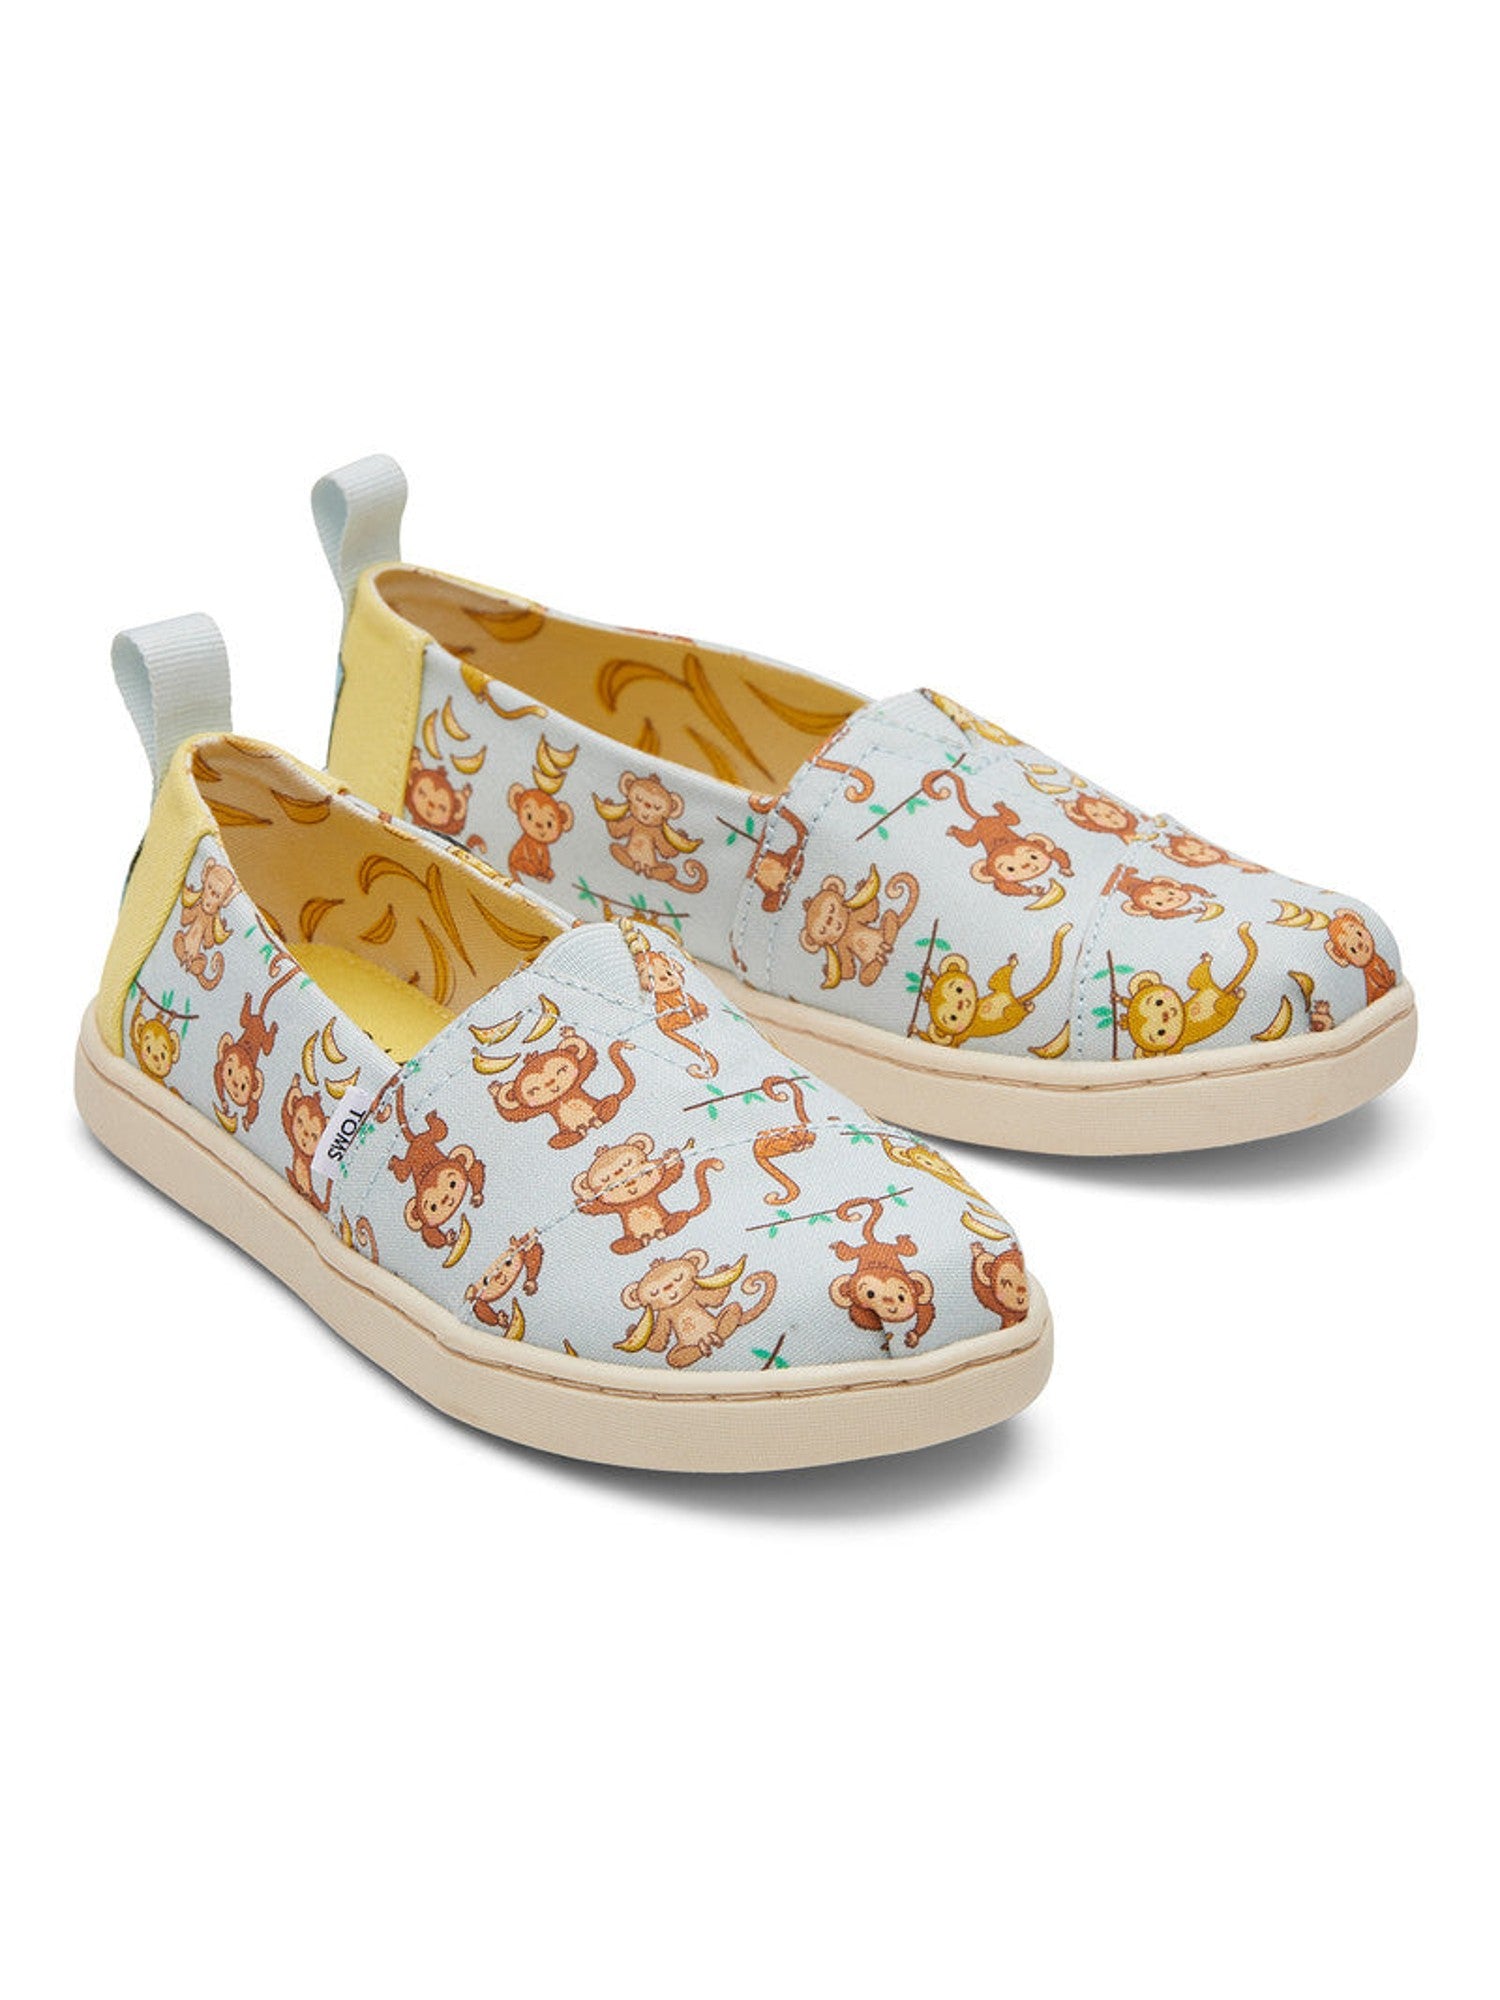 Alp Canvas Monkey Print Slip Ons-TOMS® India Official Site